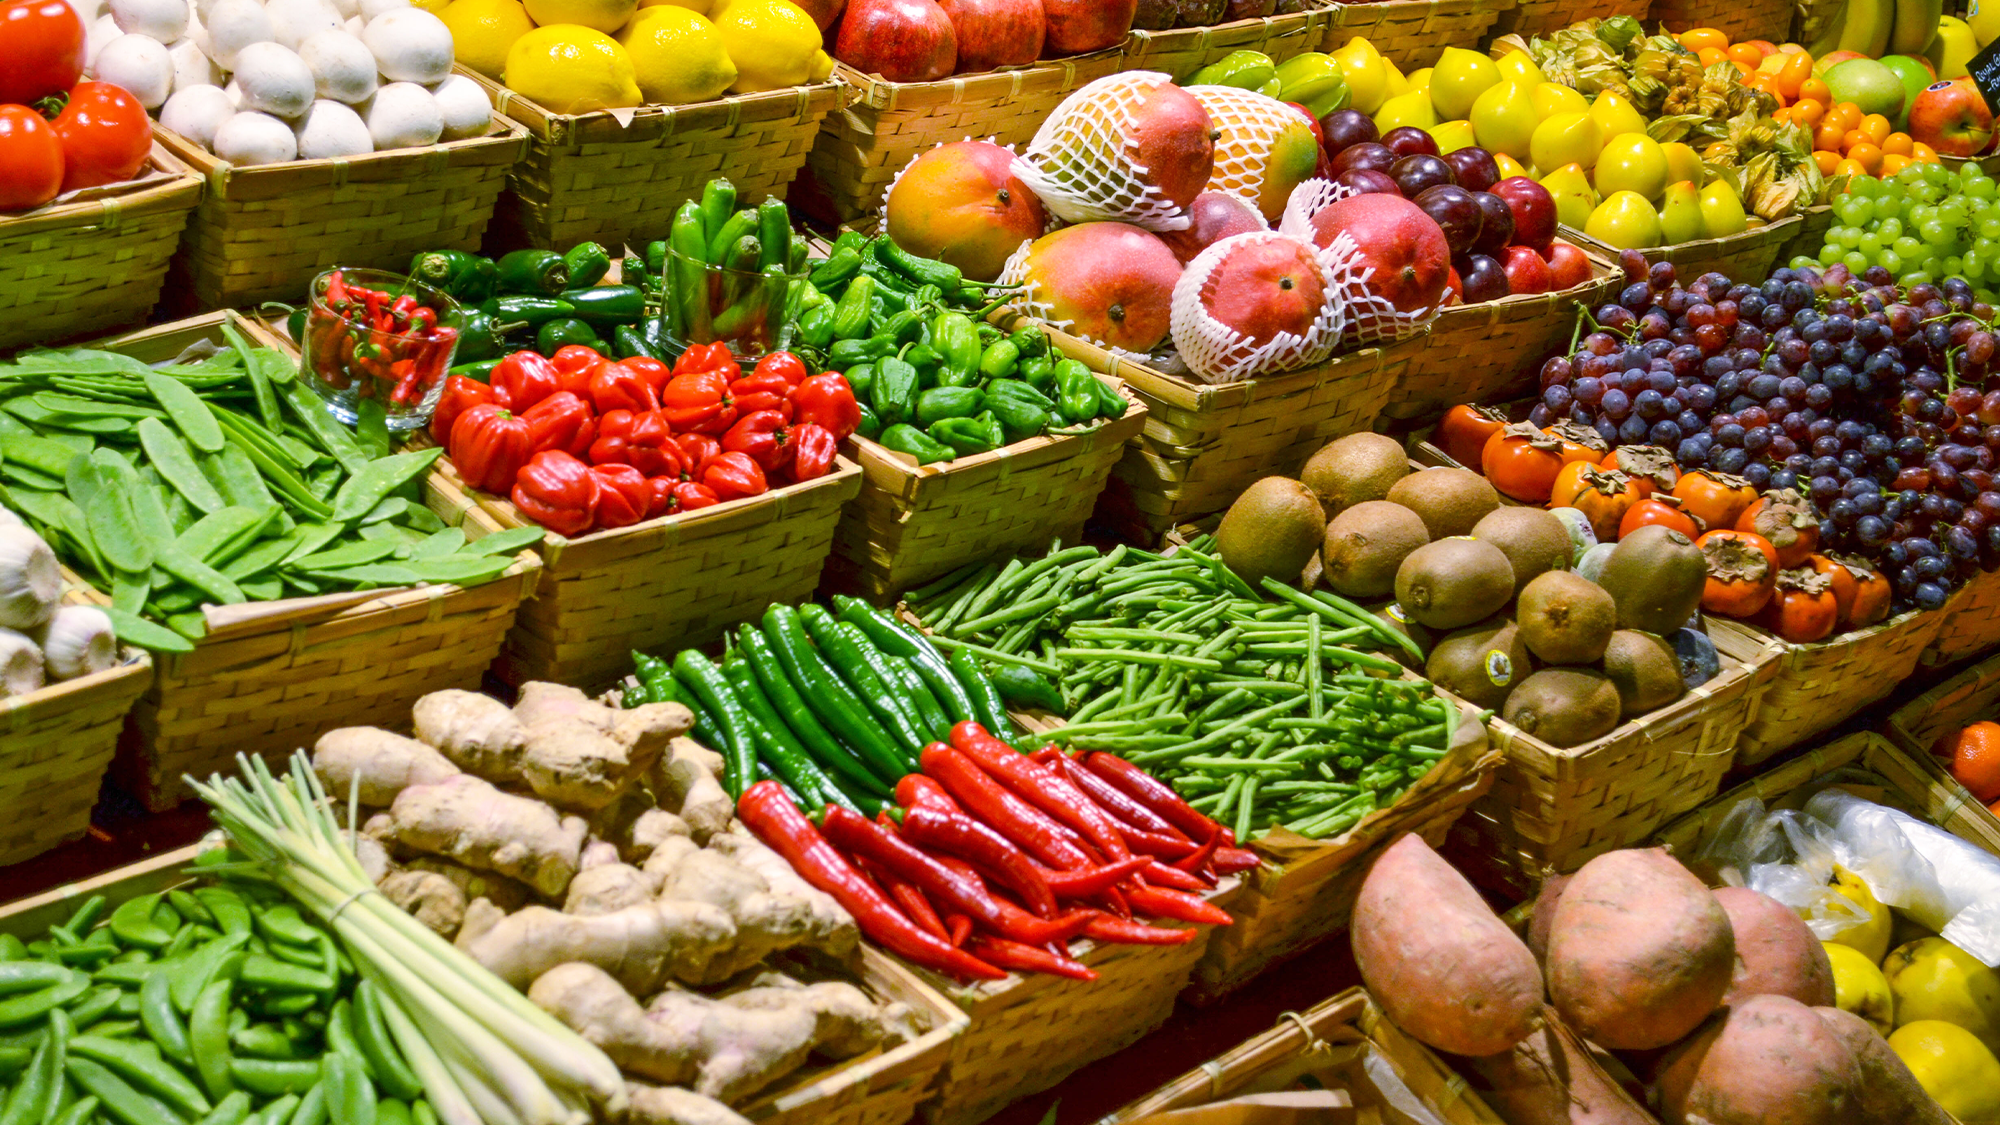 Why US vegetable prices have skyrocketed in the past year